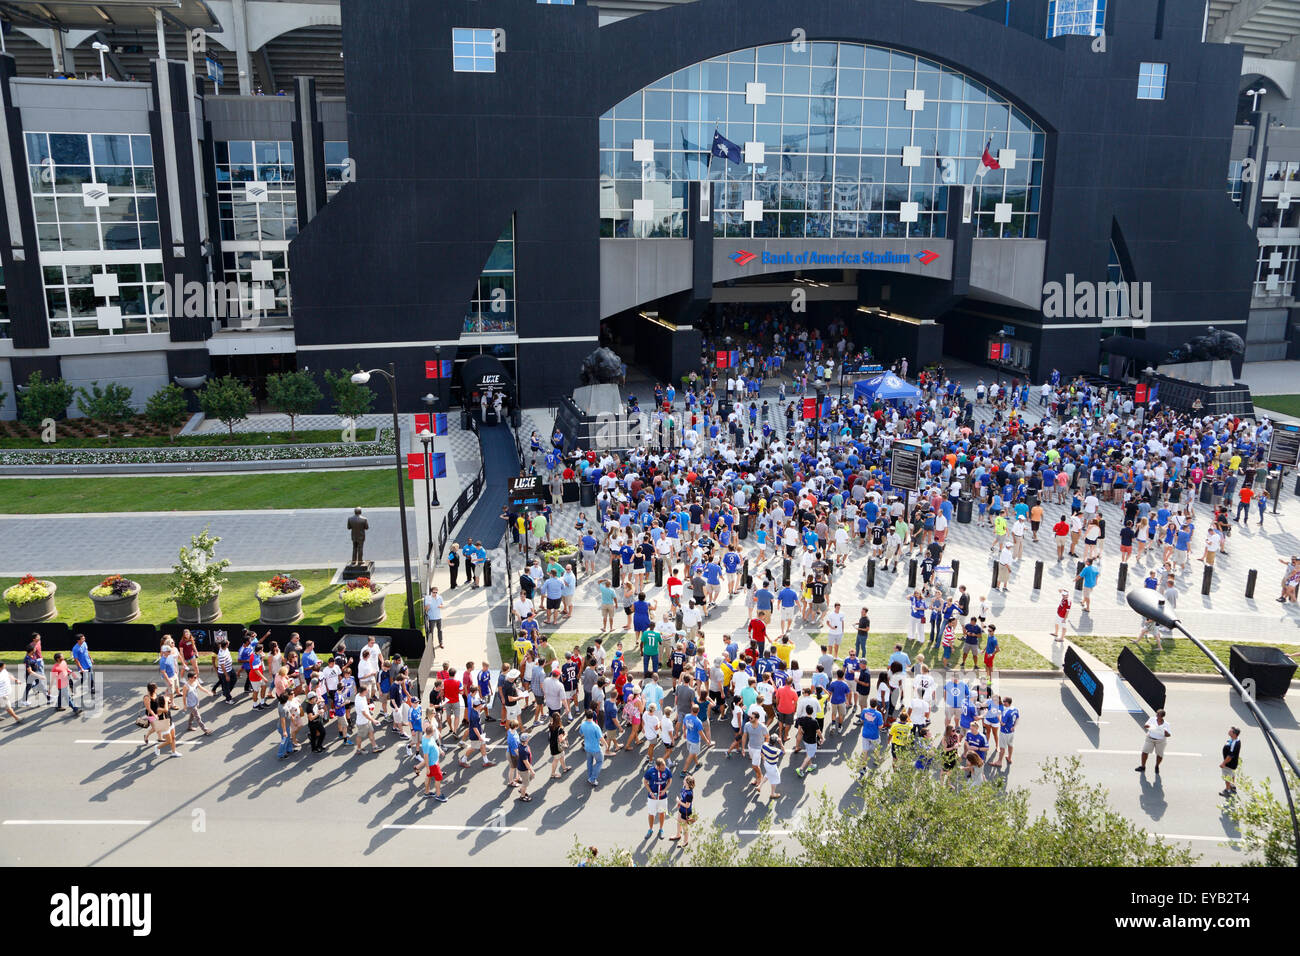 Charlotte, North Carolina, USA, July 25, 2015: The city of Charlotte hosts International Champions Cup match between Chelsea and Paris Saint-Germain at Bank of America Stadium. Soccer fans are entering the stadium. America is seeing increased interest in Soccer. Credit:  Rose-Marie Murray/Alamy Live News Stock Photo